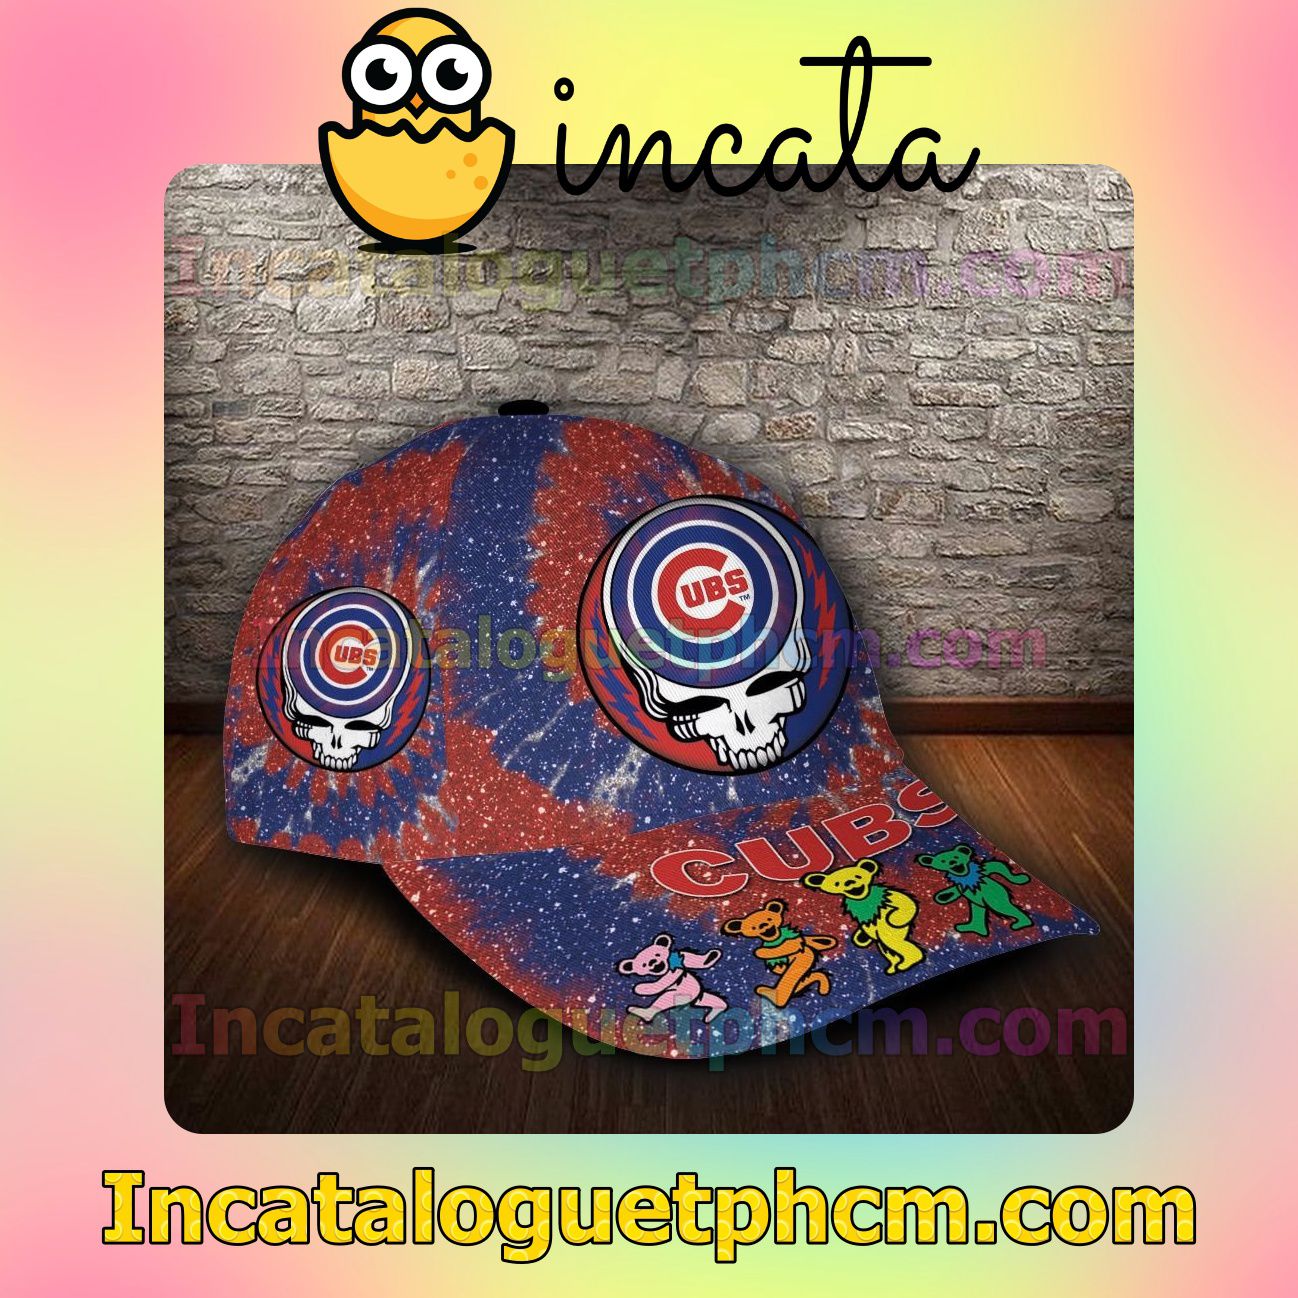 Discount Chicago Cubs & Grateful Dead Band MLB Customized Hat Caps